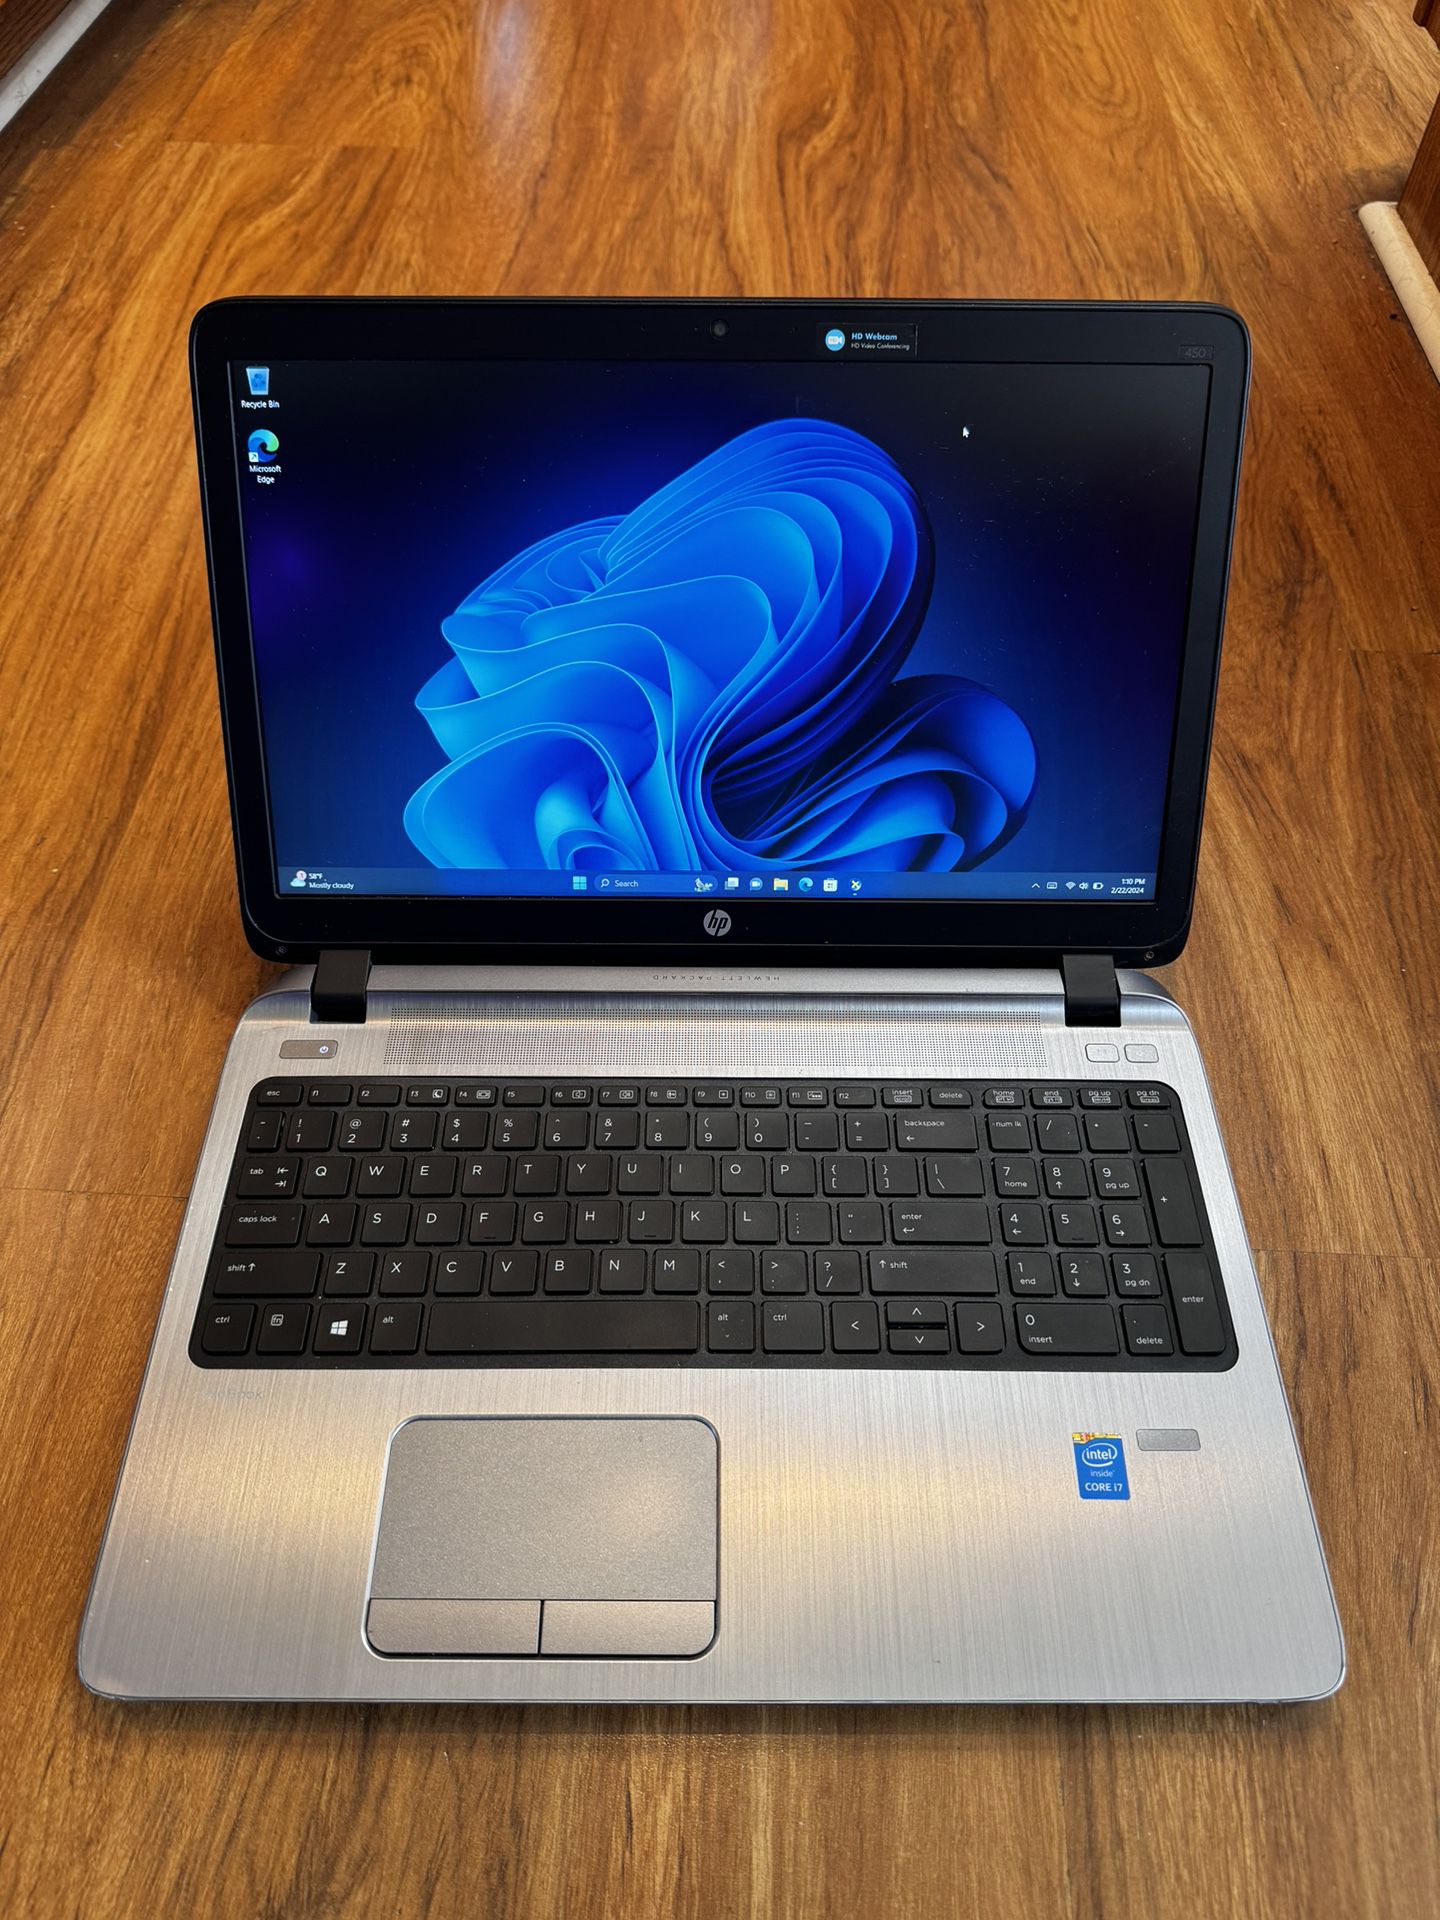 HP ProBook 450 G2 core i7 5th gen 16GB Ram 256GB SSD Windows 11 Pro 15.6” FHD Screen Laptop with charger in Excellent Working condition!!!!!  Specific